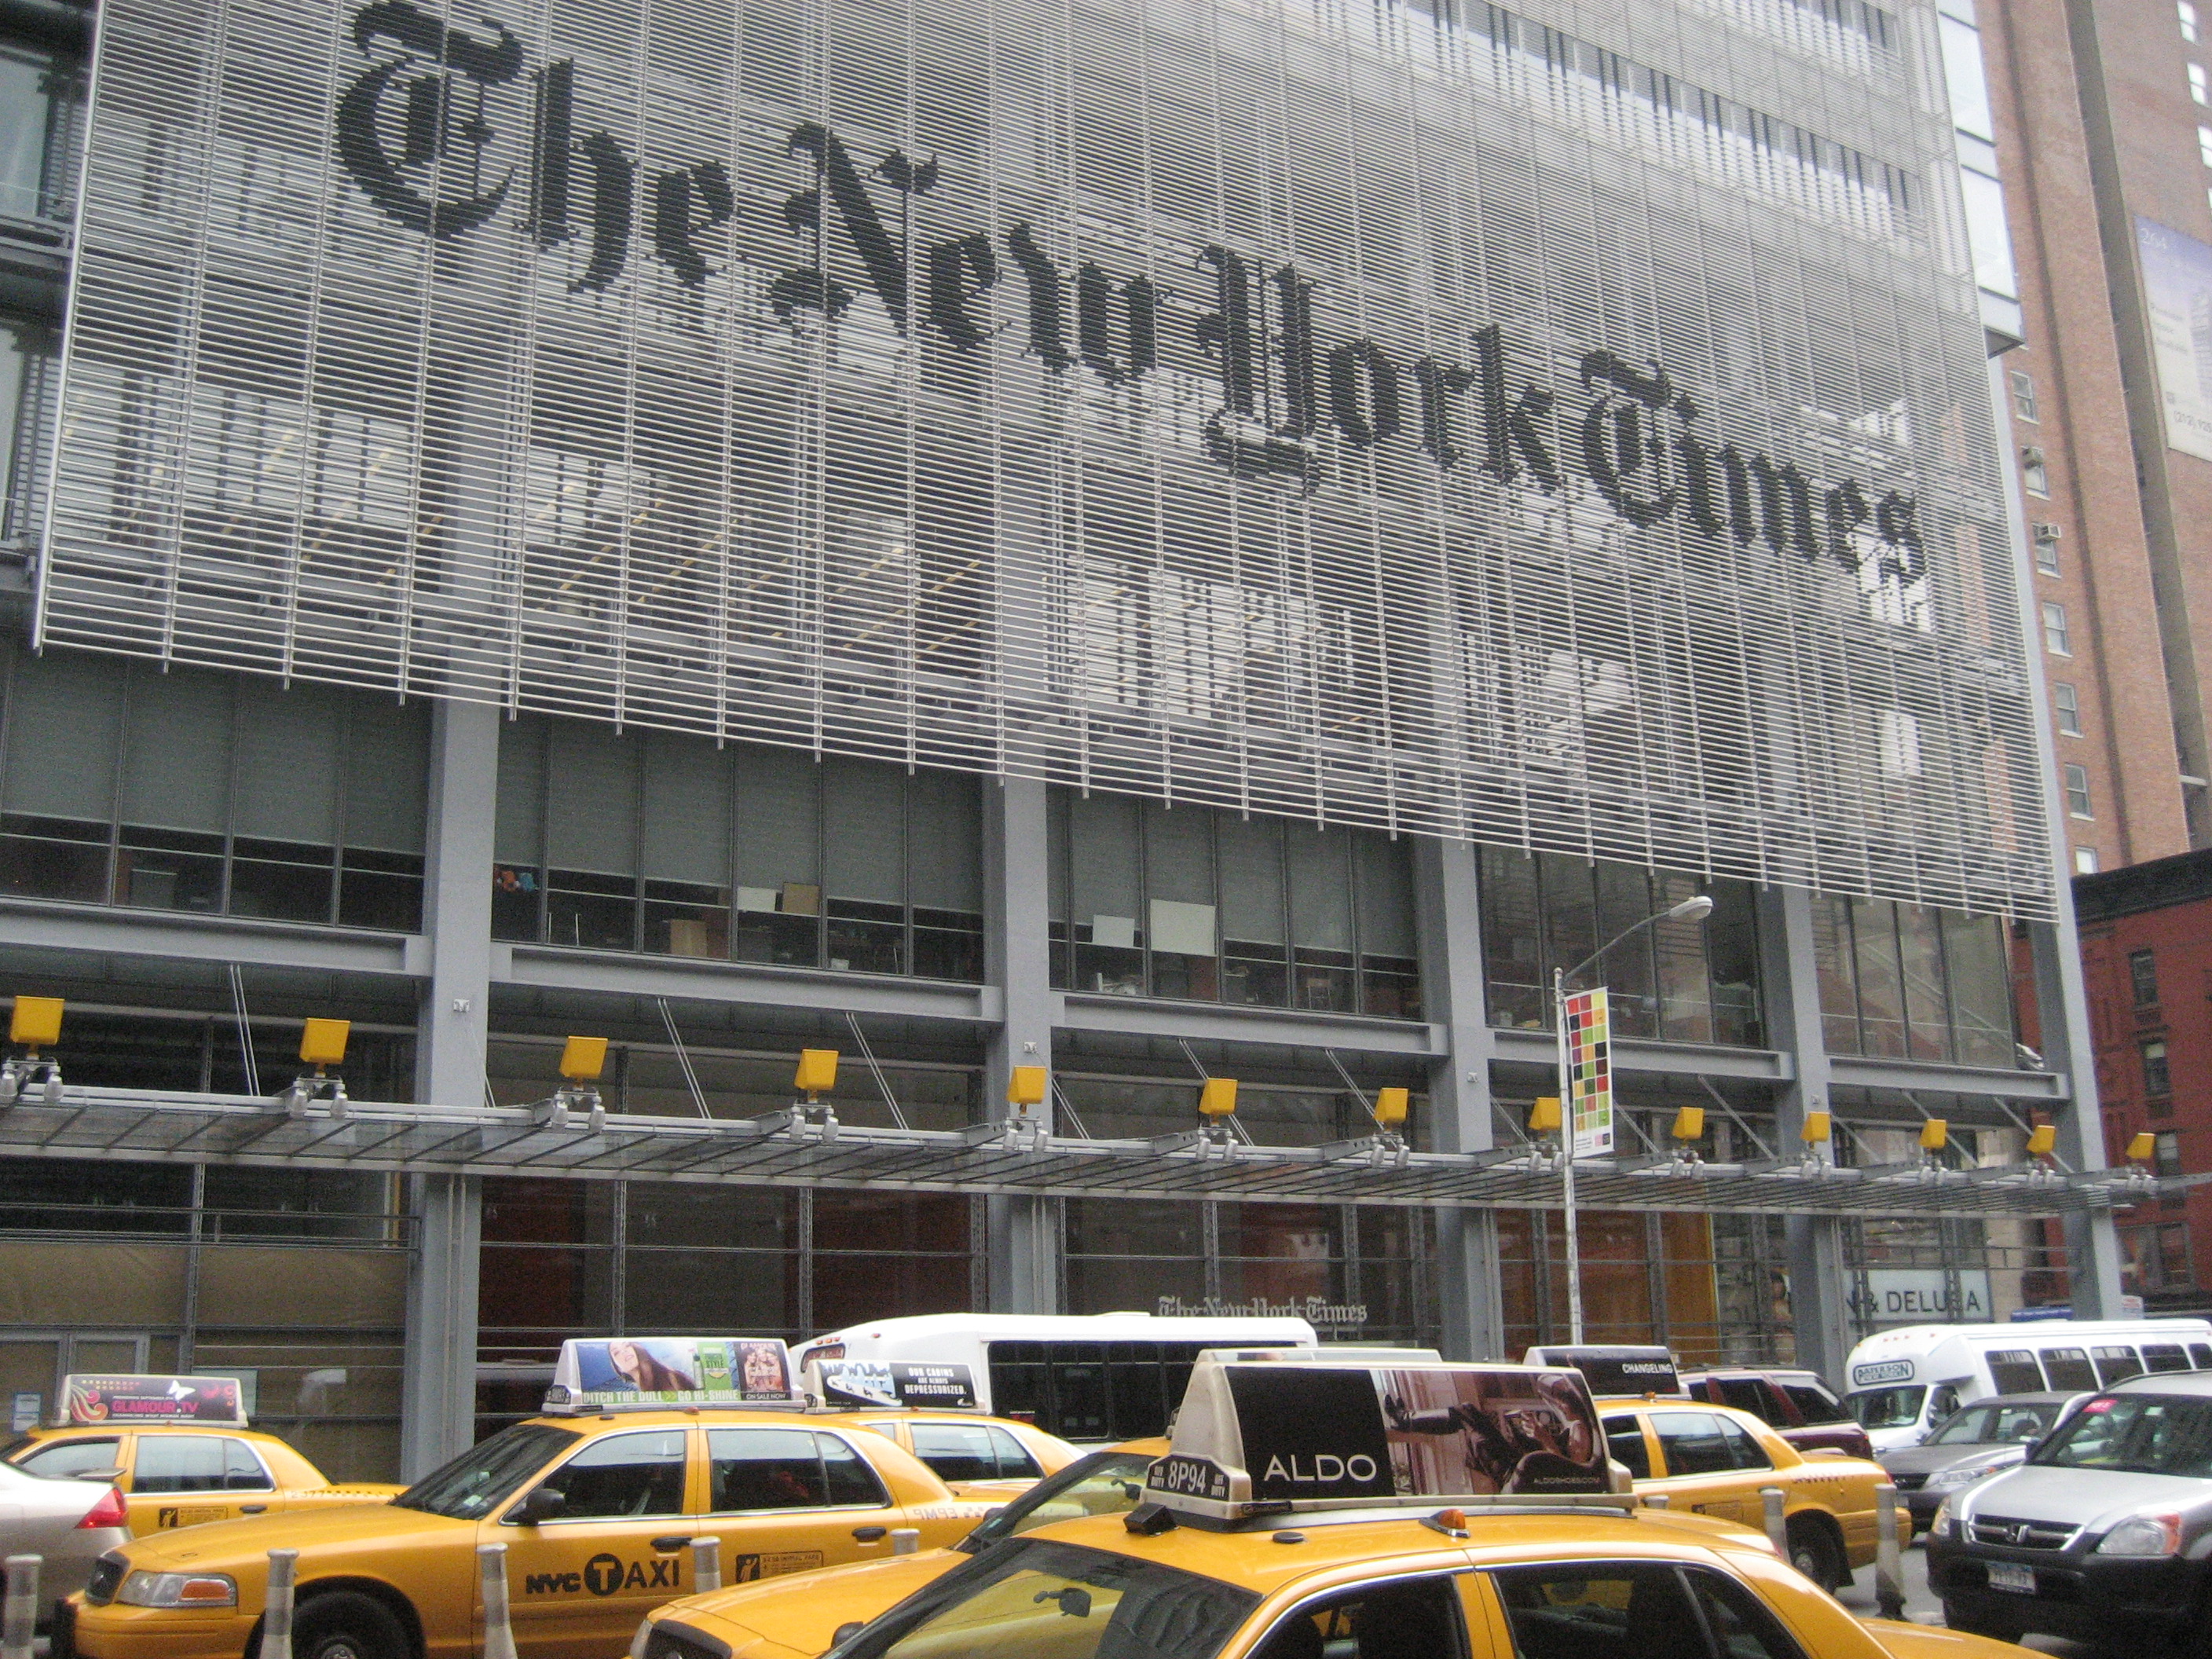 New York Times Teams Up with Spotify